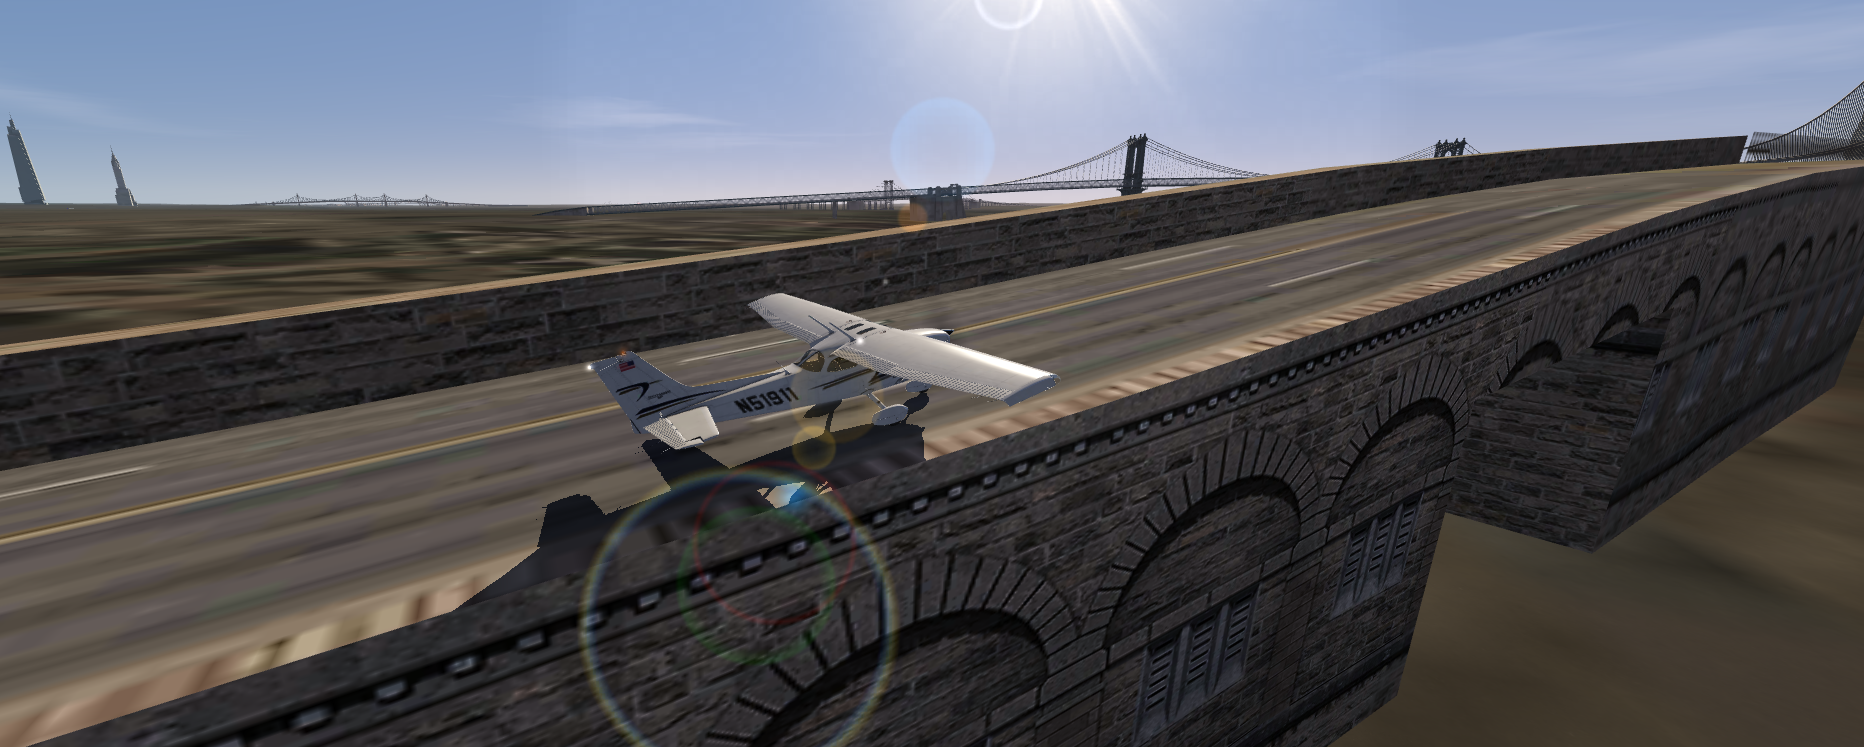 Cessna 172 is visiting NYC